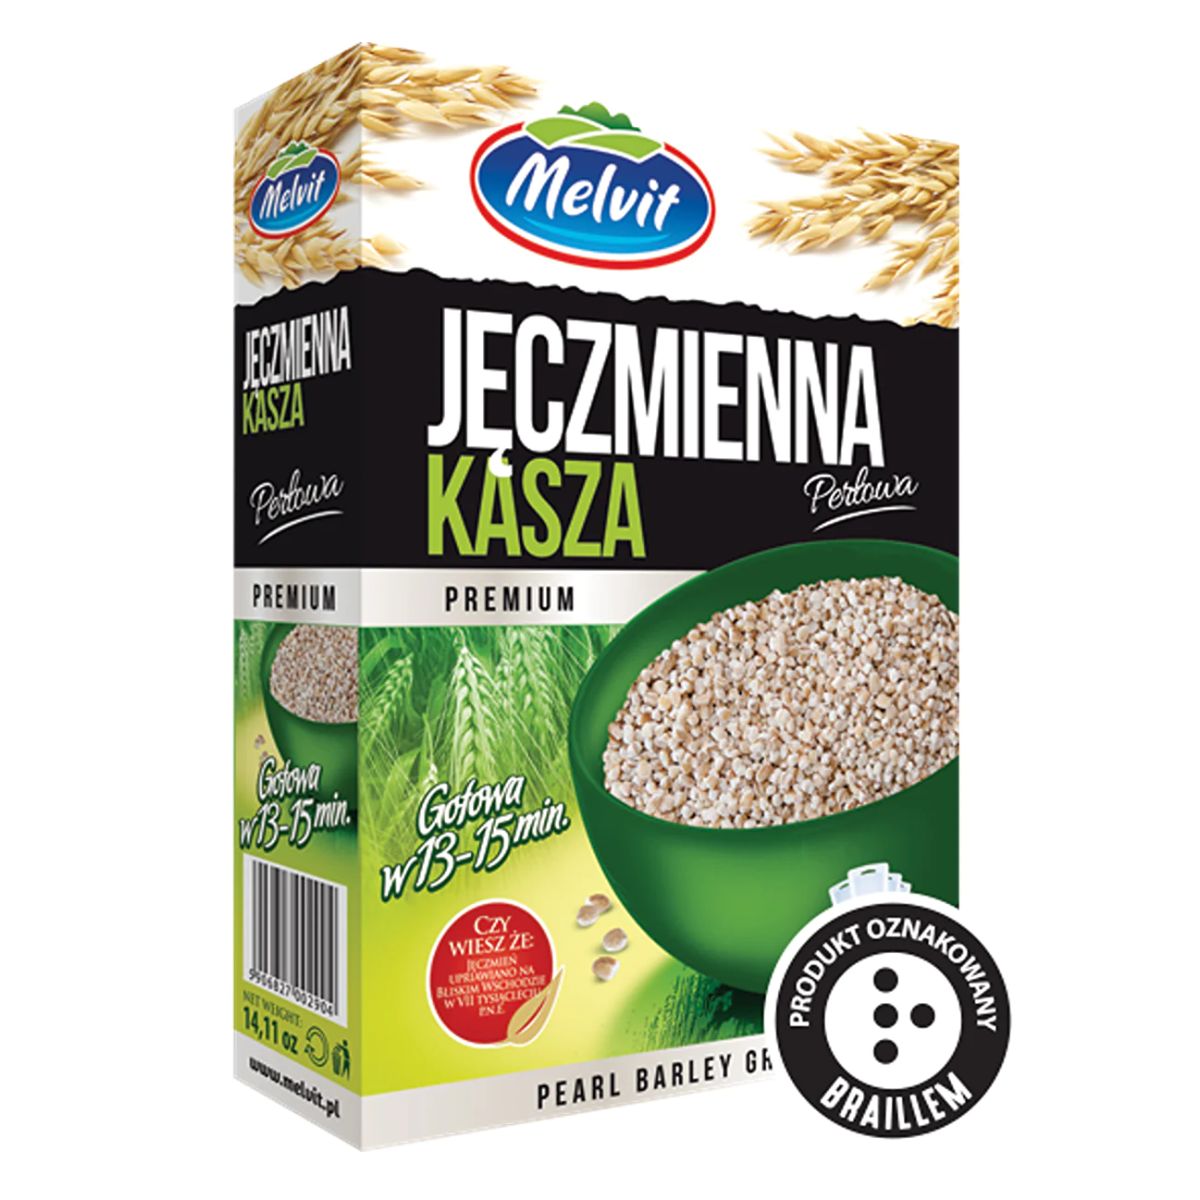 Package of Melvit Premium Pearl Barley Groats with a label indicating it's a premium product in polish language, marked with a sign for the visually impaired.